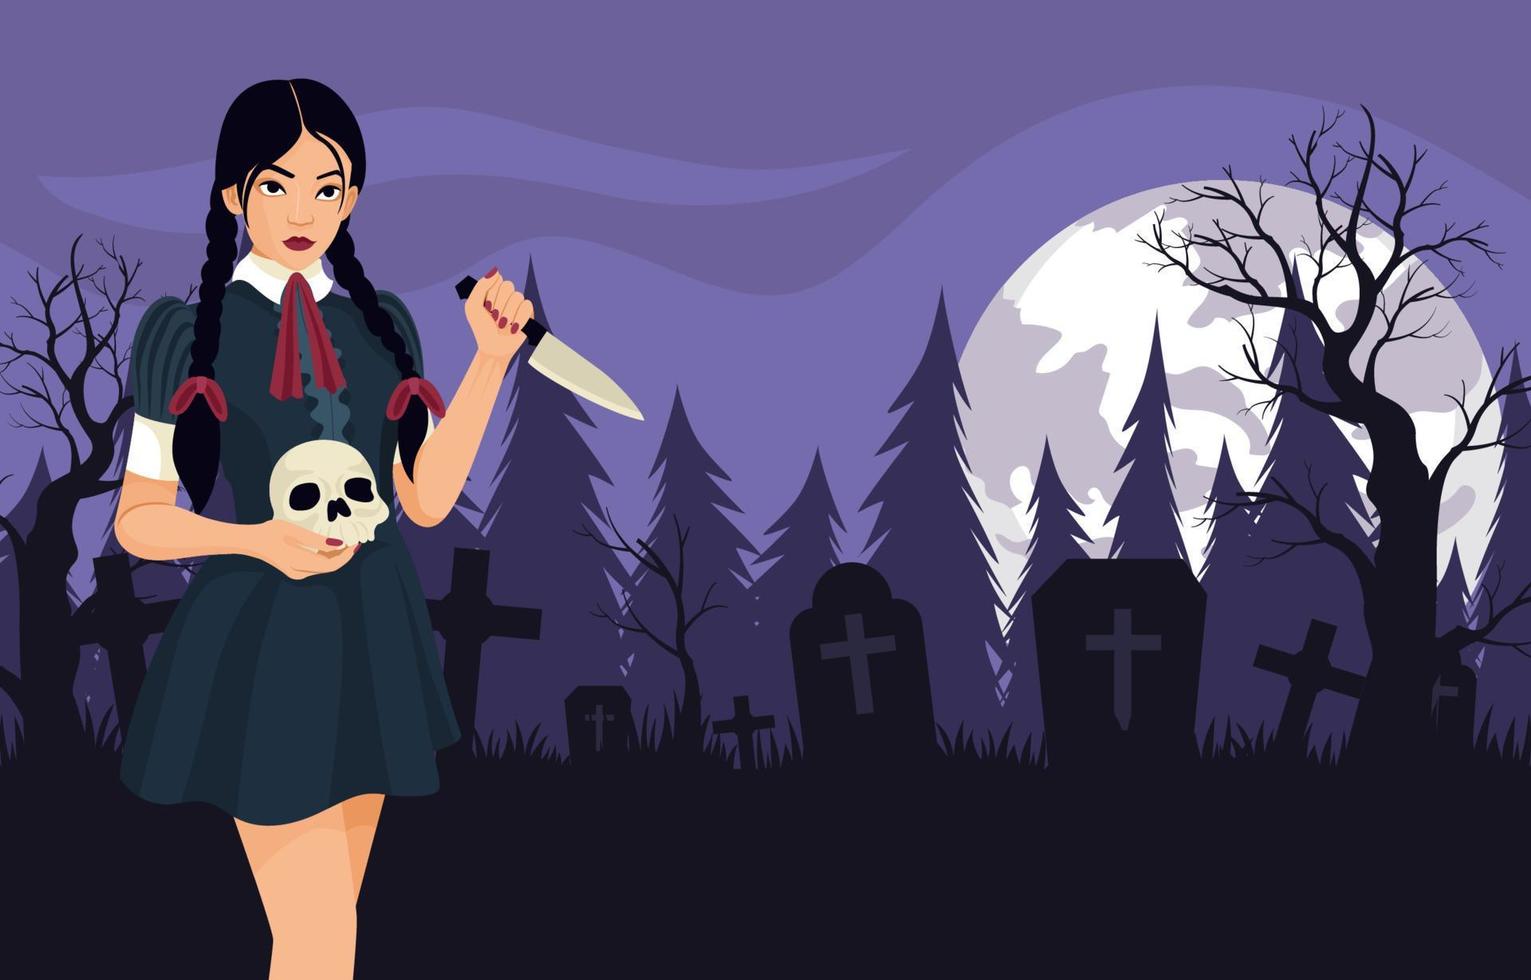 Scary Girl Carrying Knife And Skull In Graveyard vector